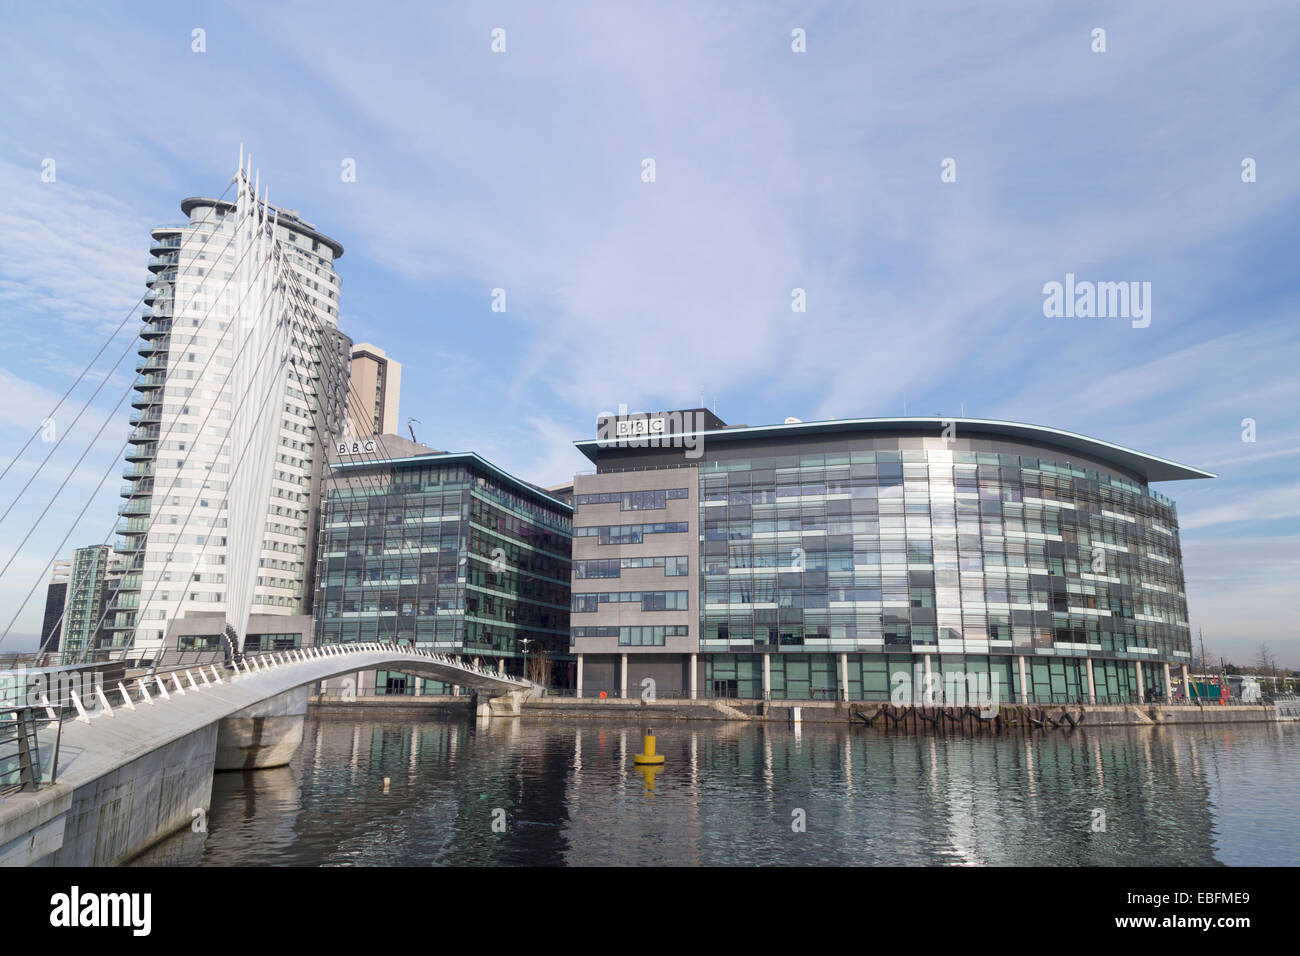 UK, Manchester, the new BBC TV Media complex at Salford Stock Photo